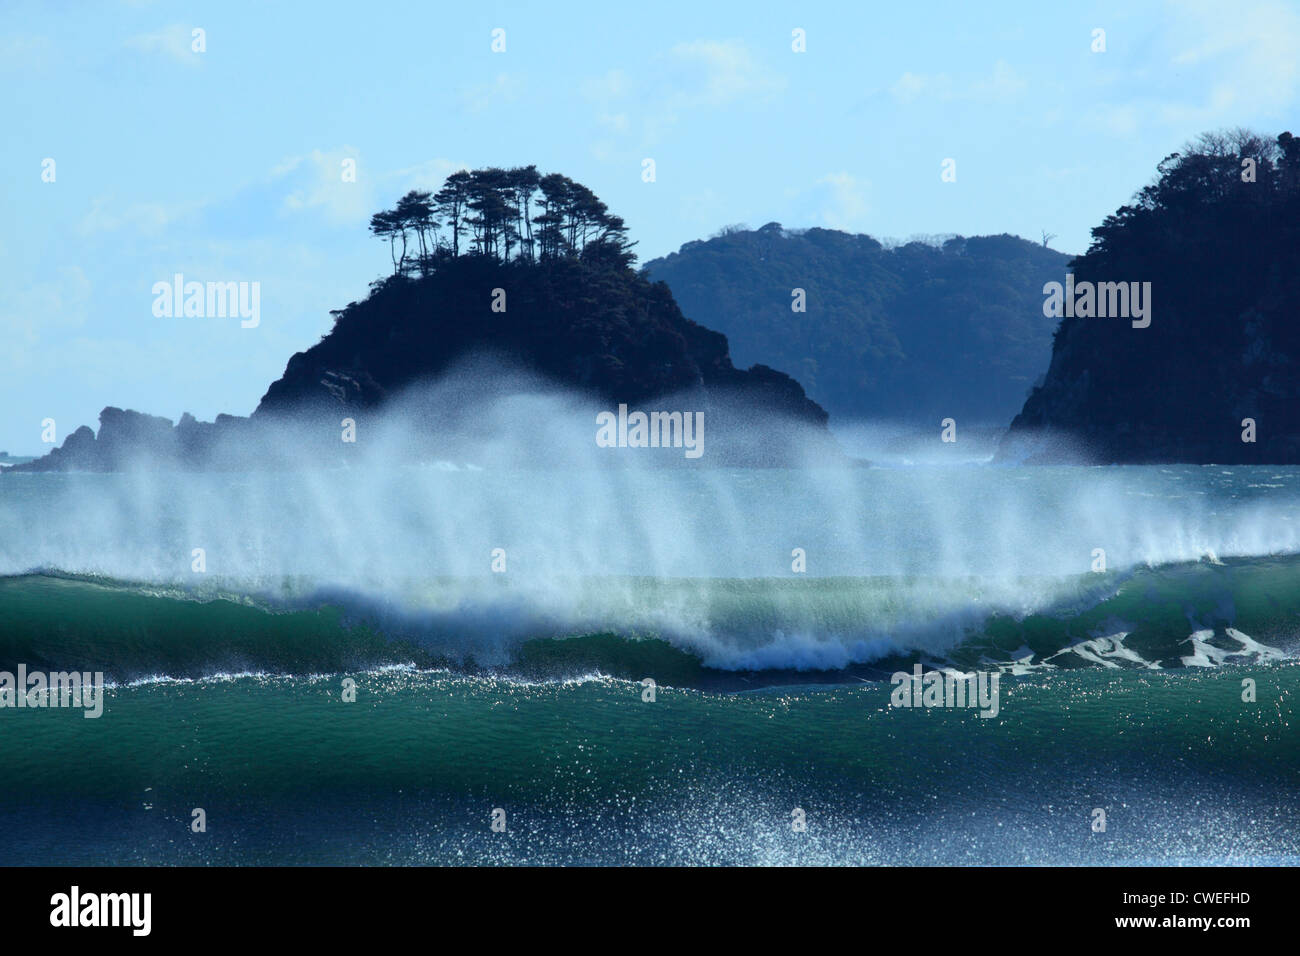 Heavy Waves And Limestone In Background Stock Photo